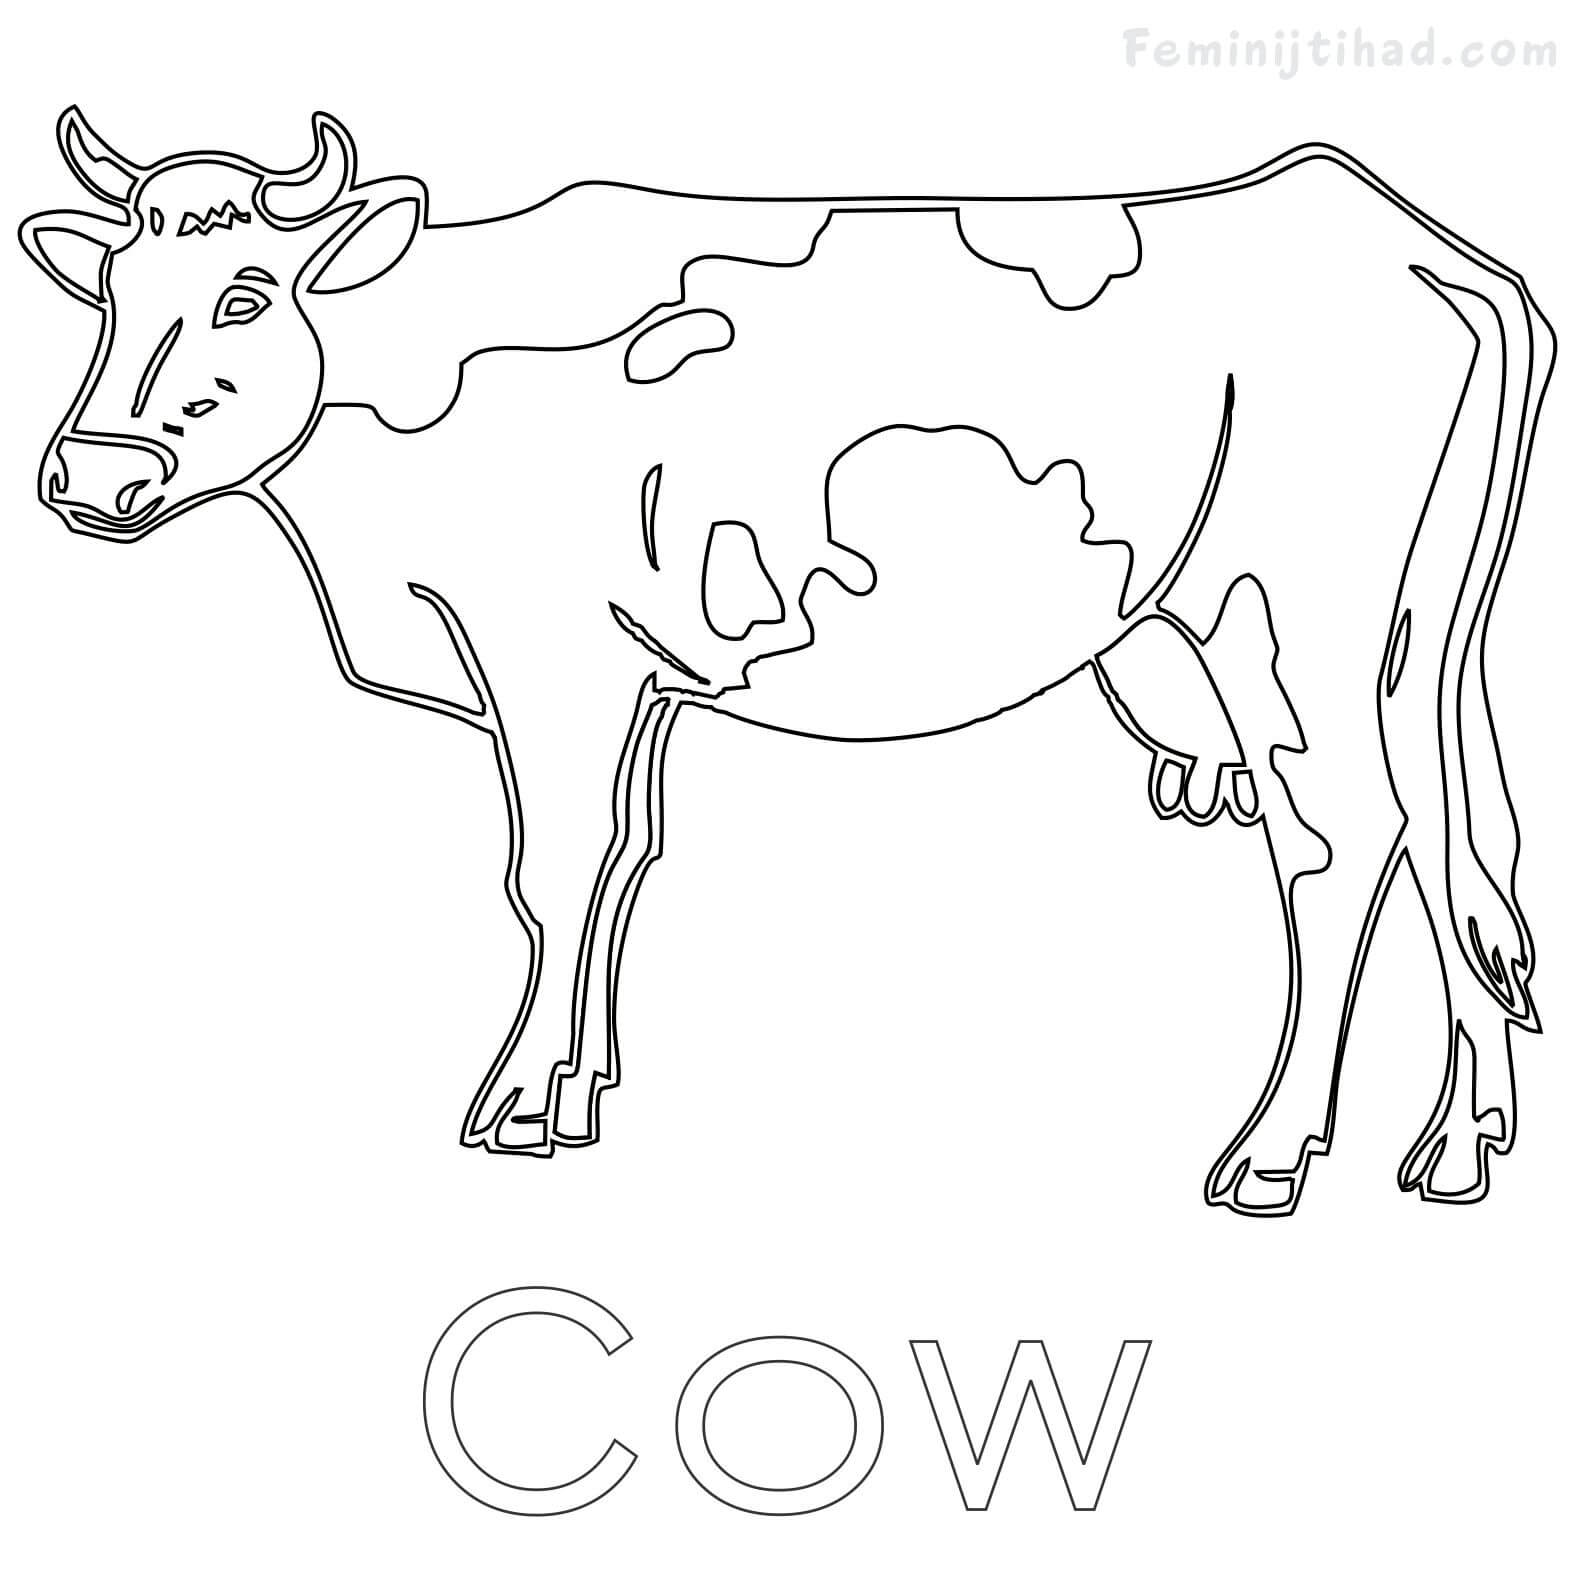 Dairy Cow Coloring Pages at Free printable colorings